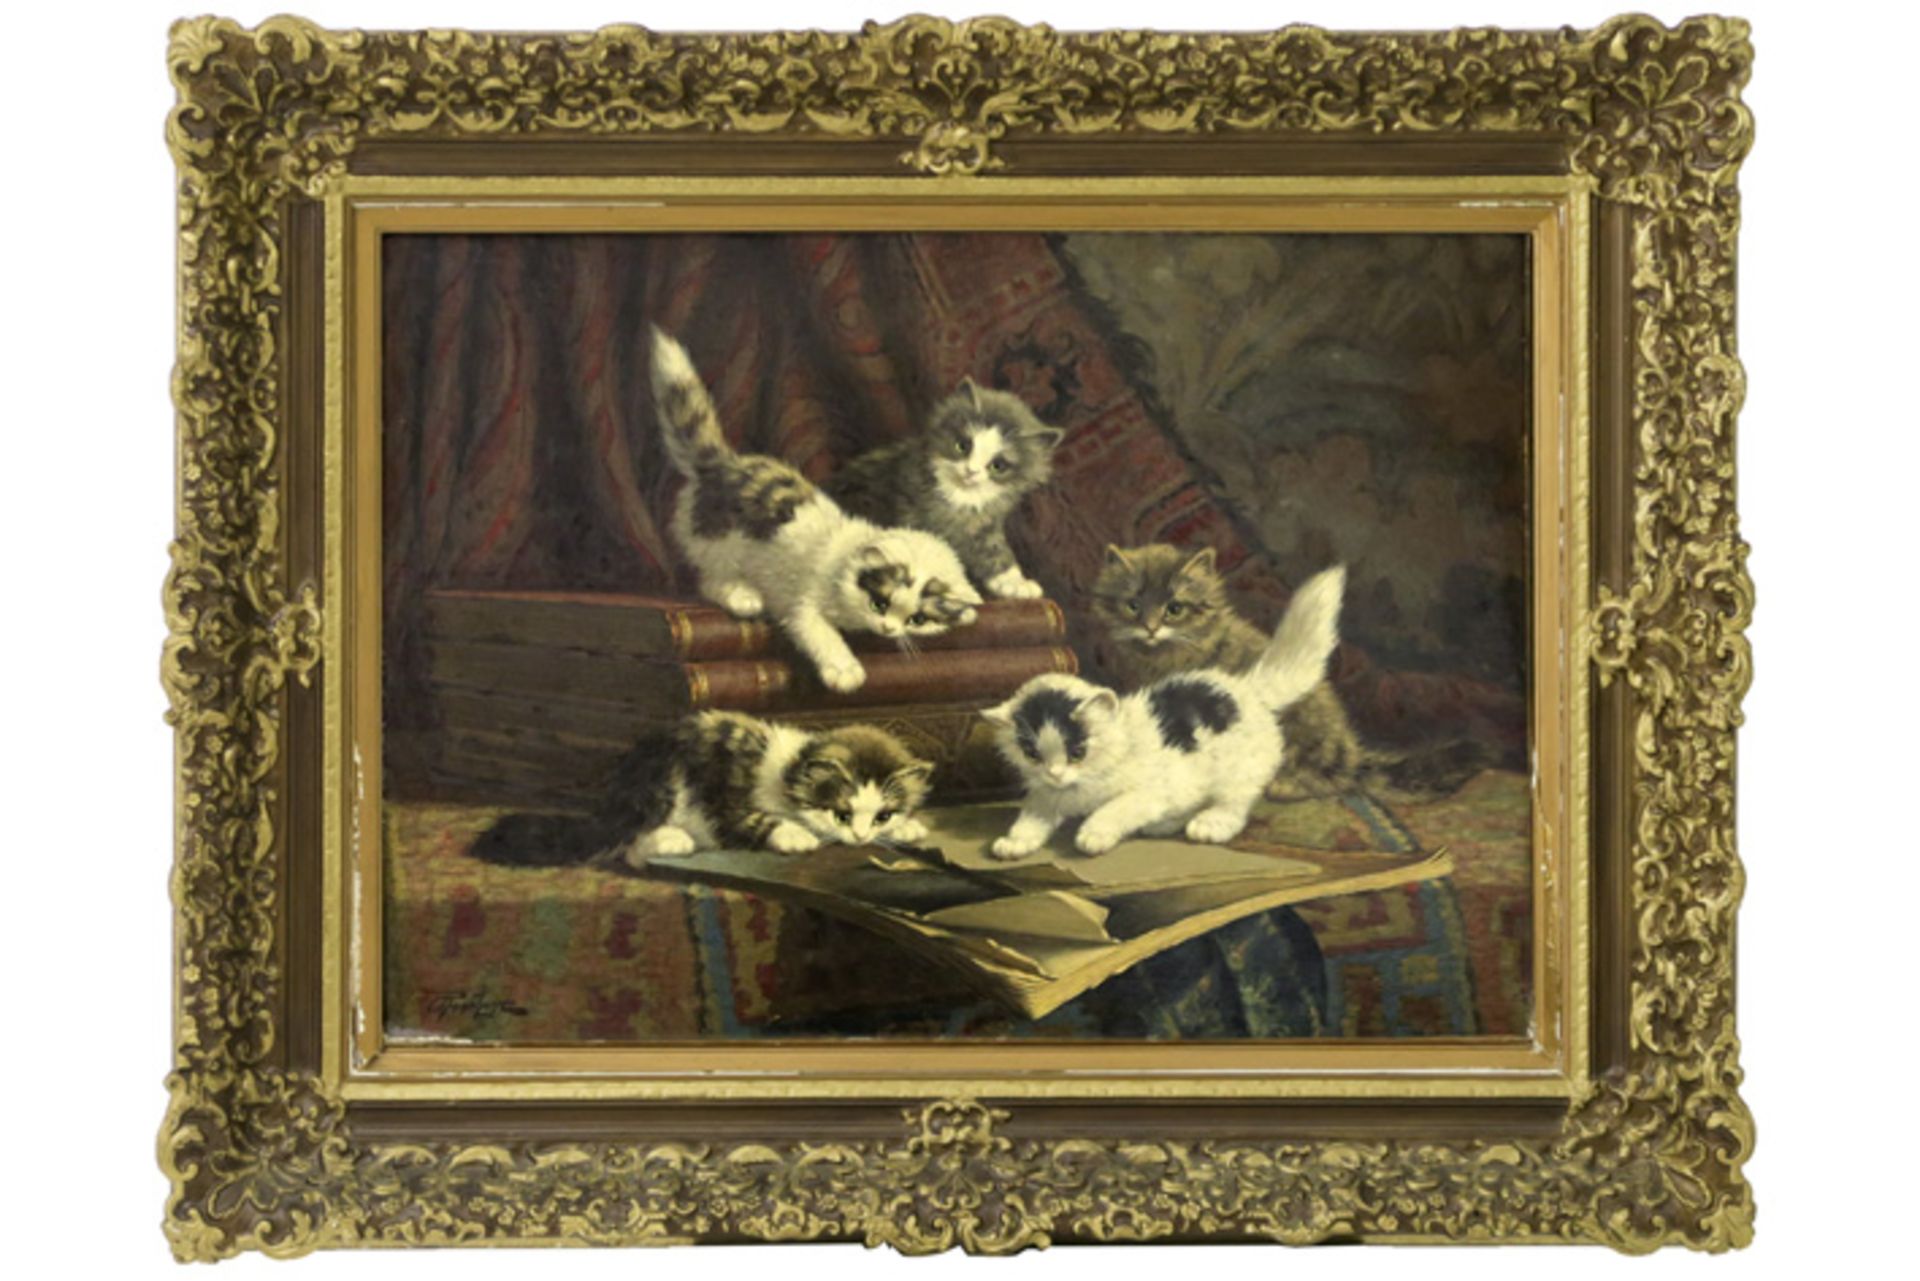 20th Cent. Dutch "Cornelis Raaphorst" oil on canvas with a typical theme with kittens [...]